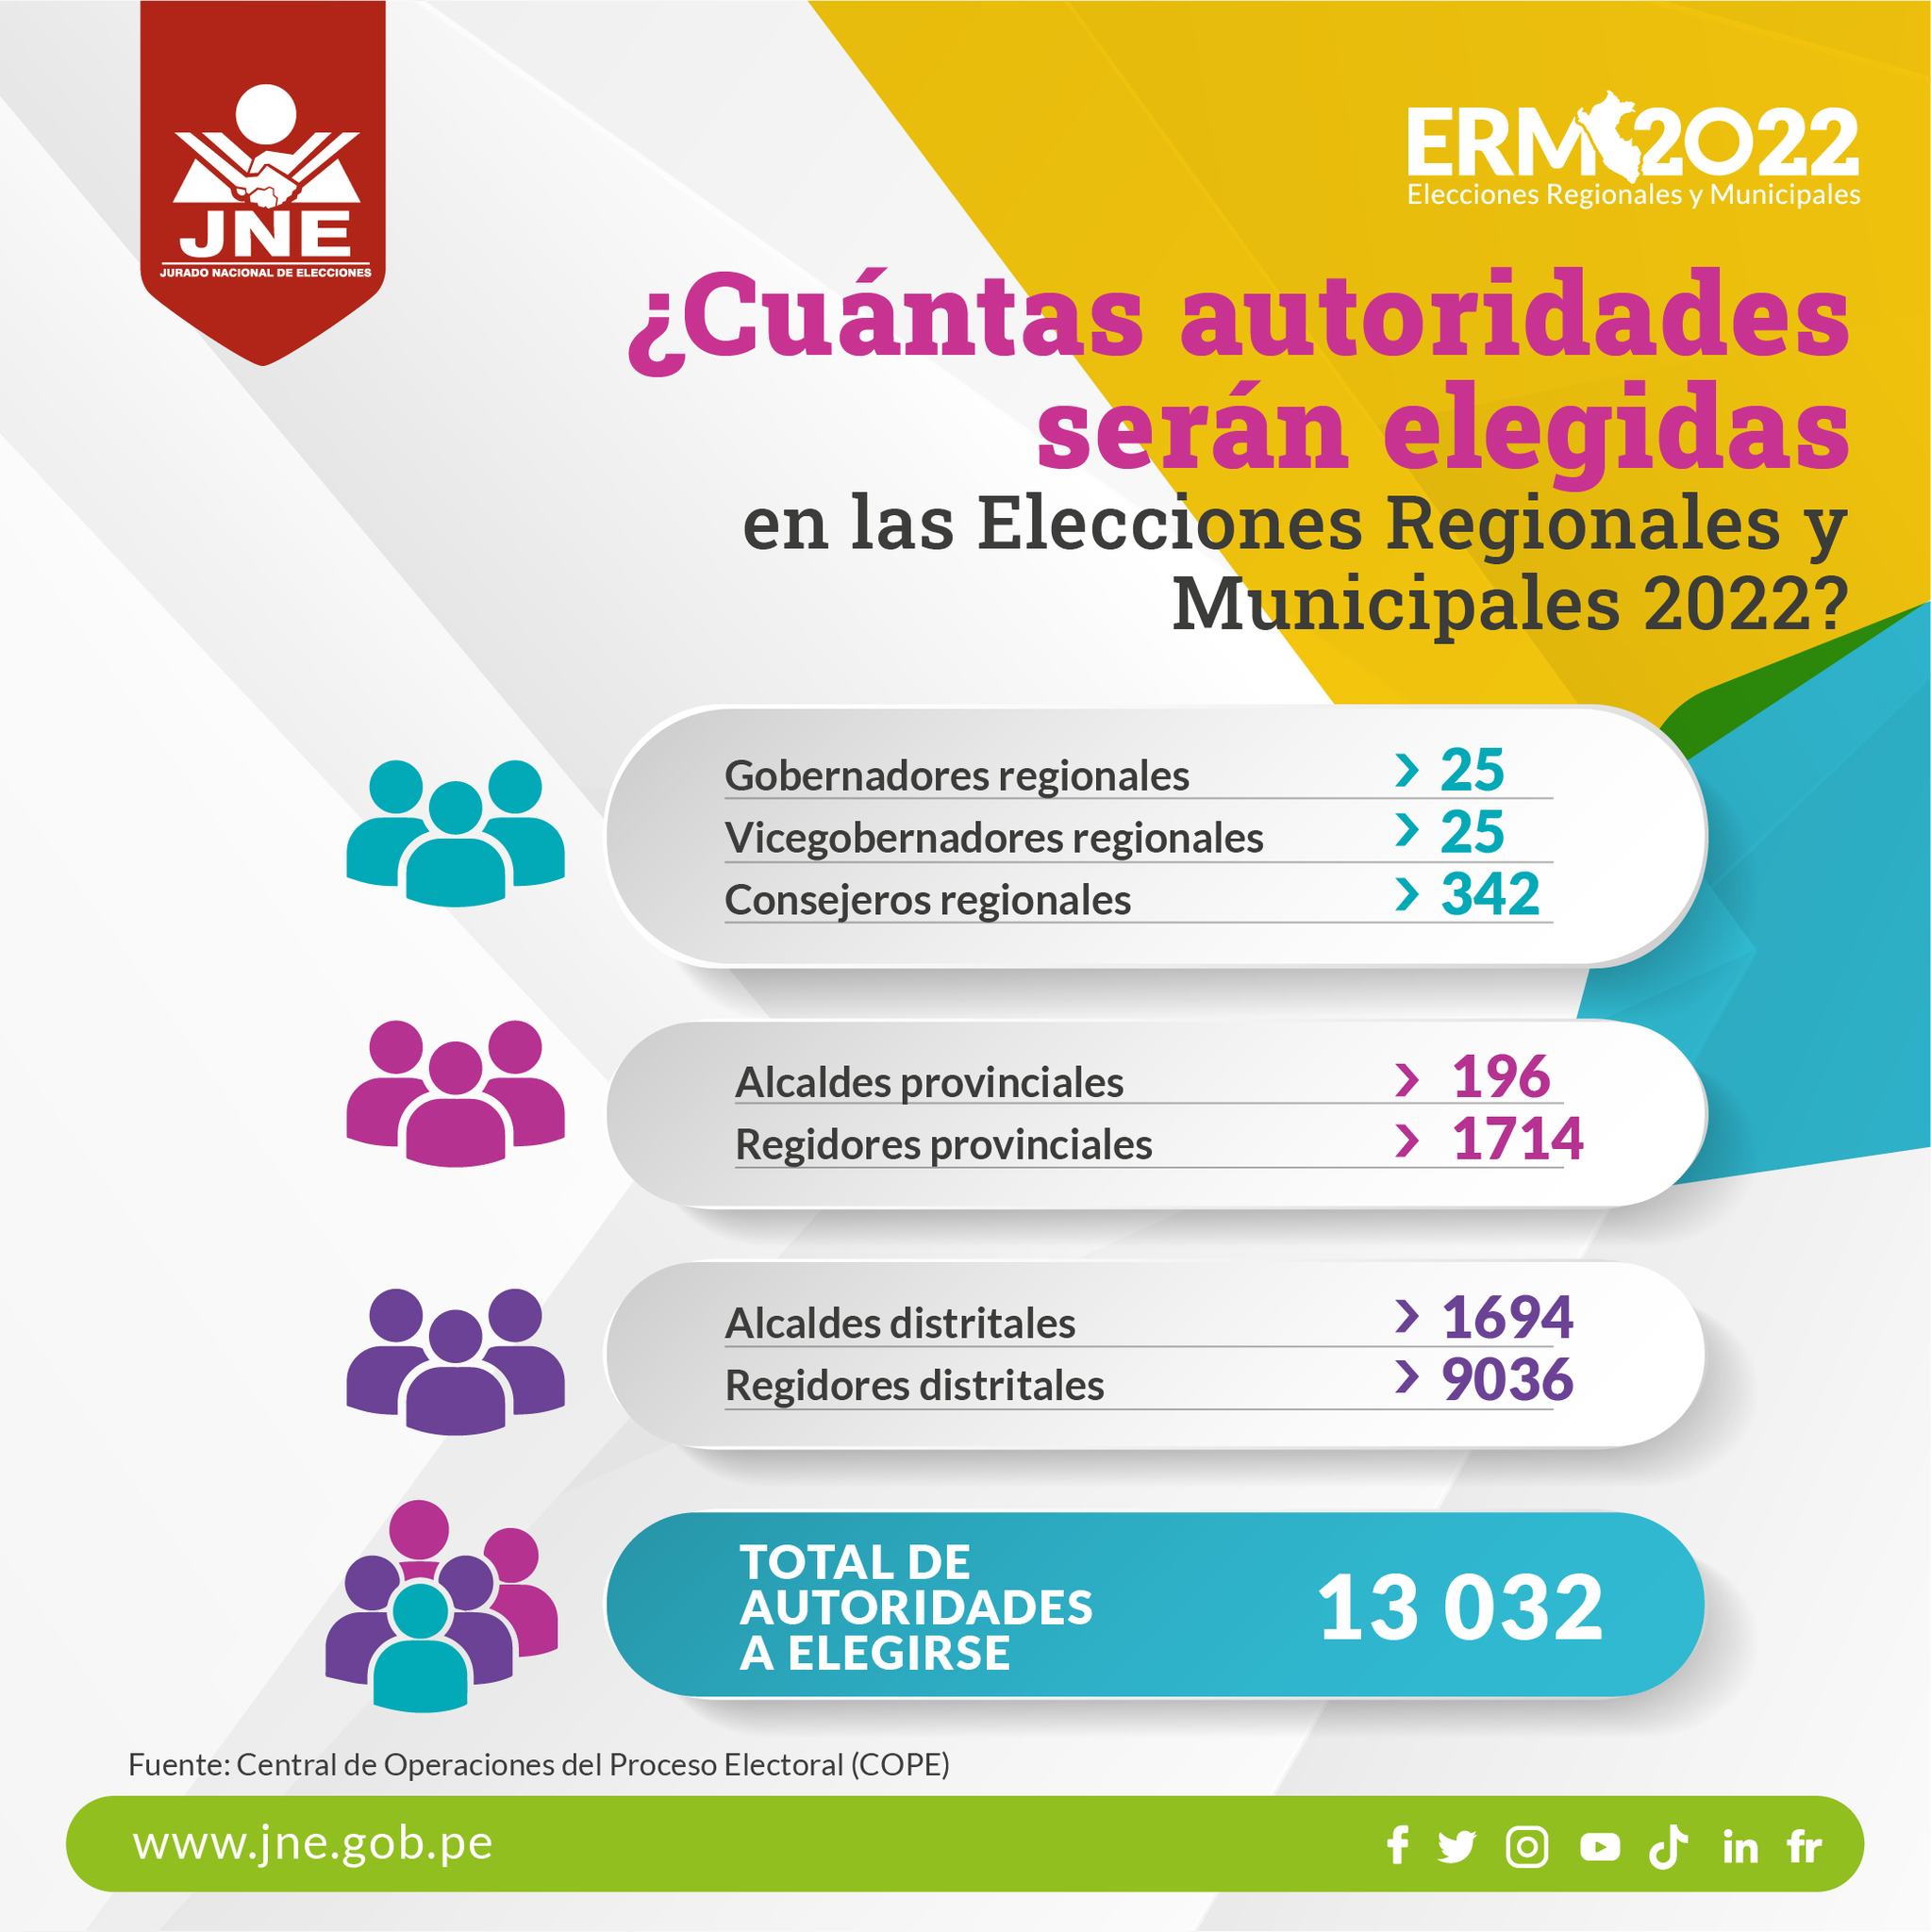 Authorities that are elected in these Municipal Regional and Municipal elections